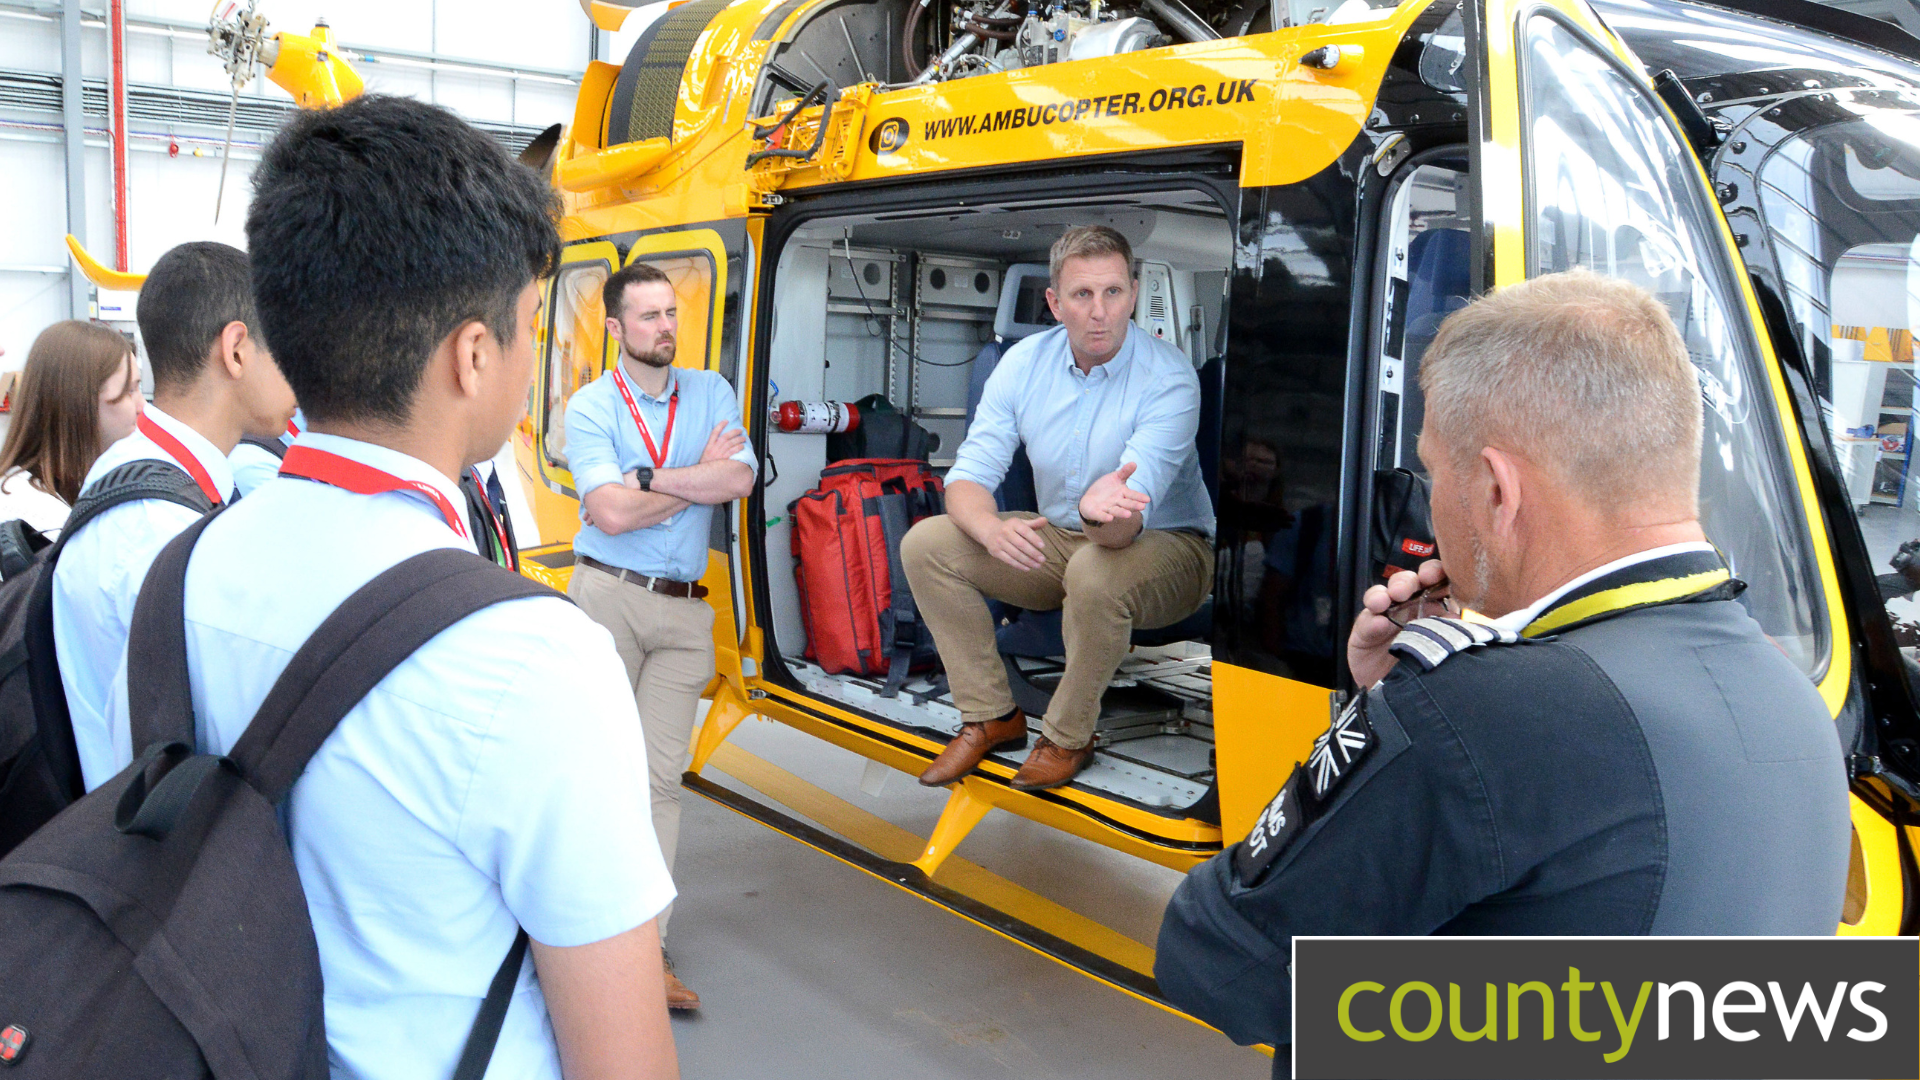 A school visit to Lincs and Notts Air Ambulance HQ to explore careers as a doctor, paramedic or pilot